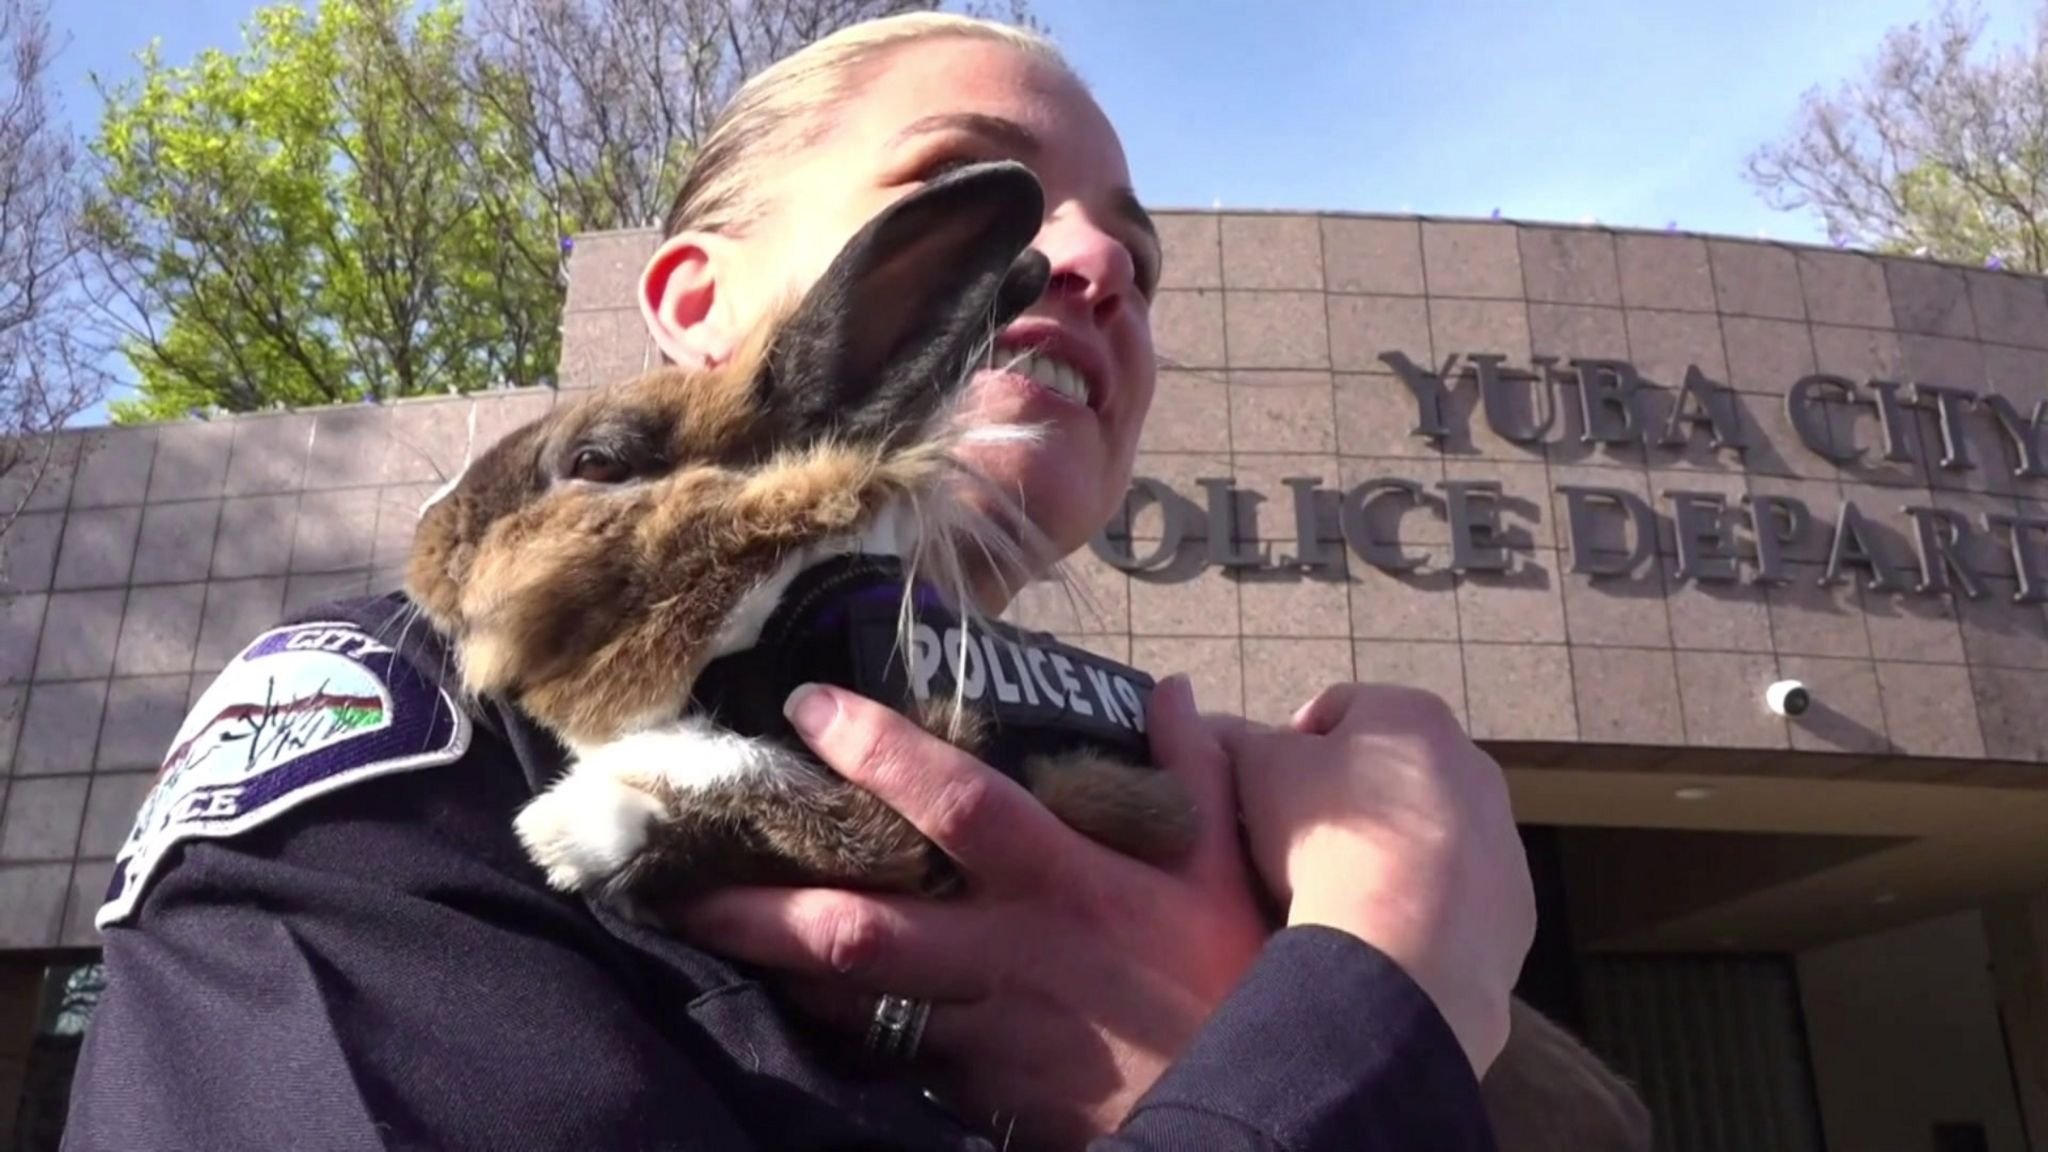 Woman holding bunny with "police" harness on